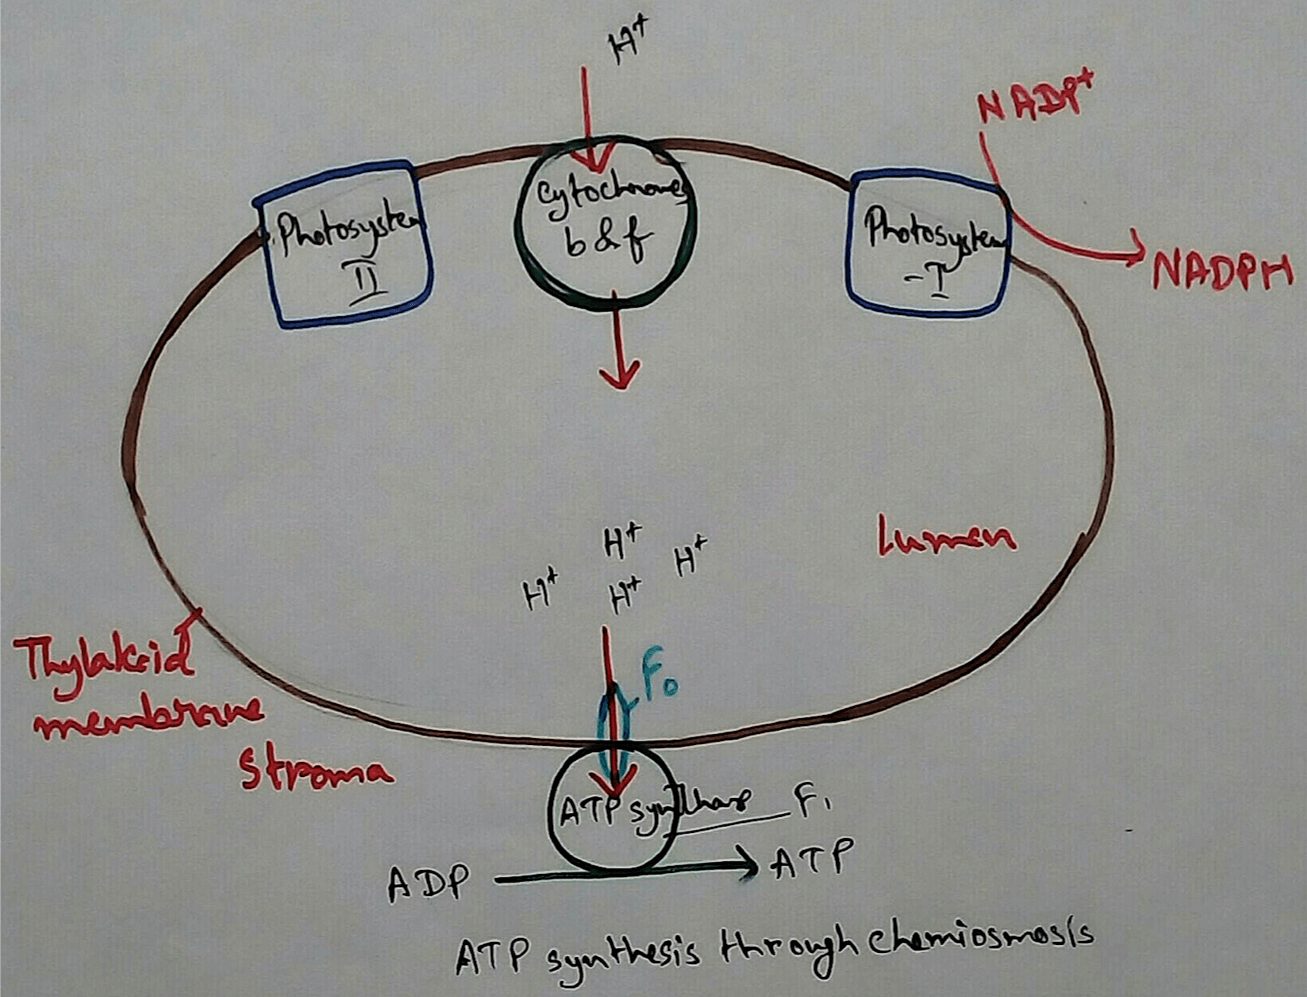 ATP Synthase in Chemiosmosis